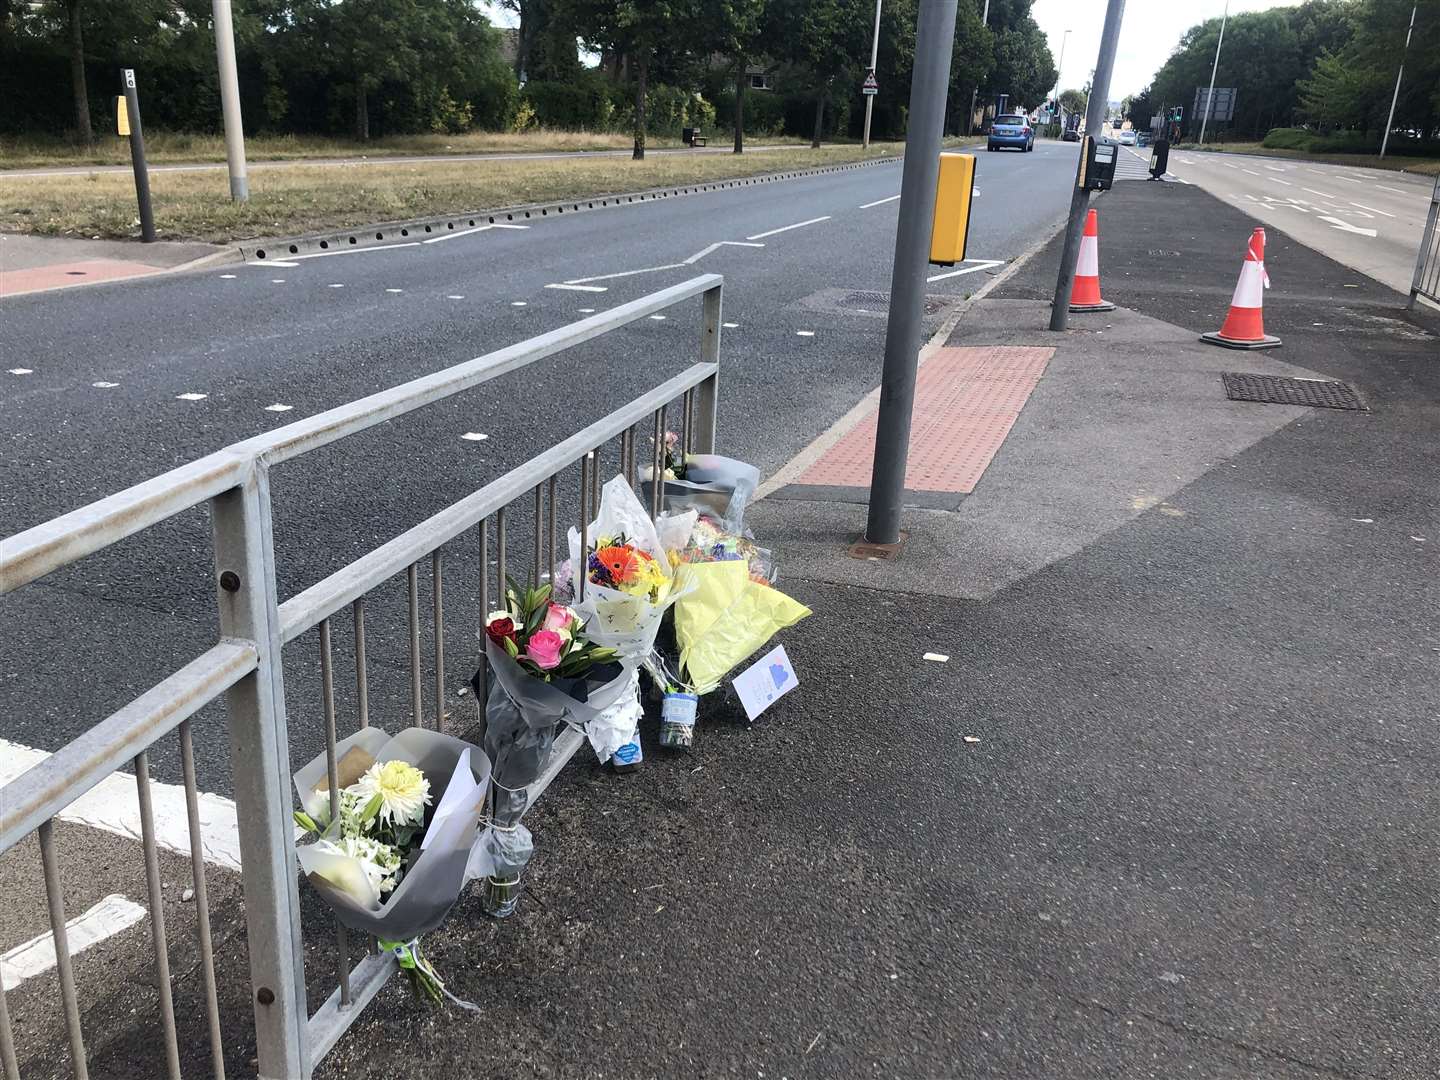 Floral tributes were left for an 'Andy C' near to Bowaters Roundabout, Gillingham